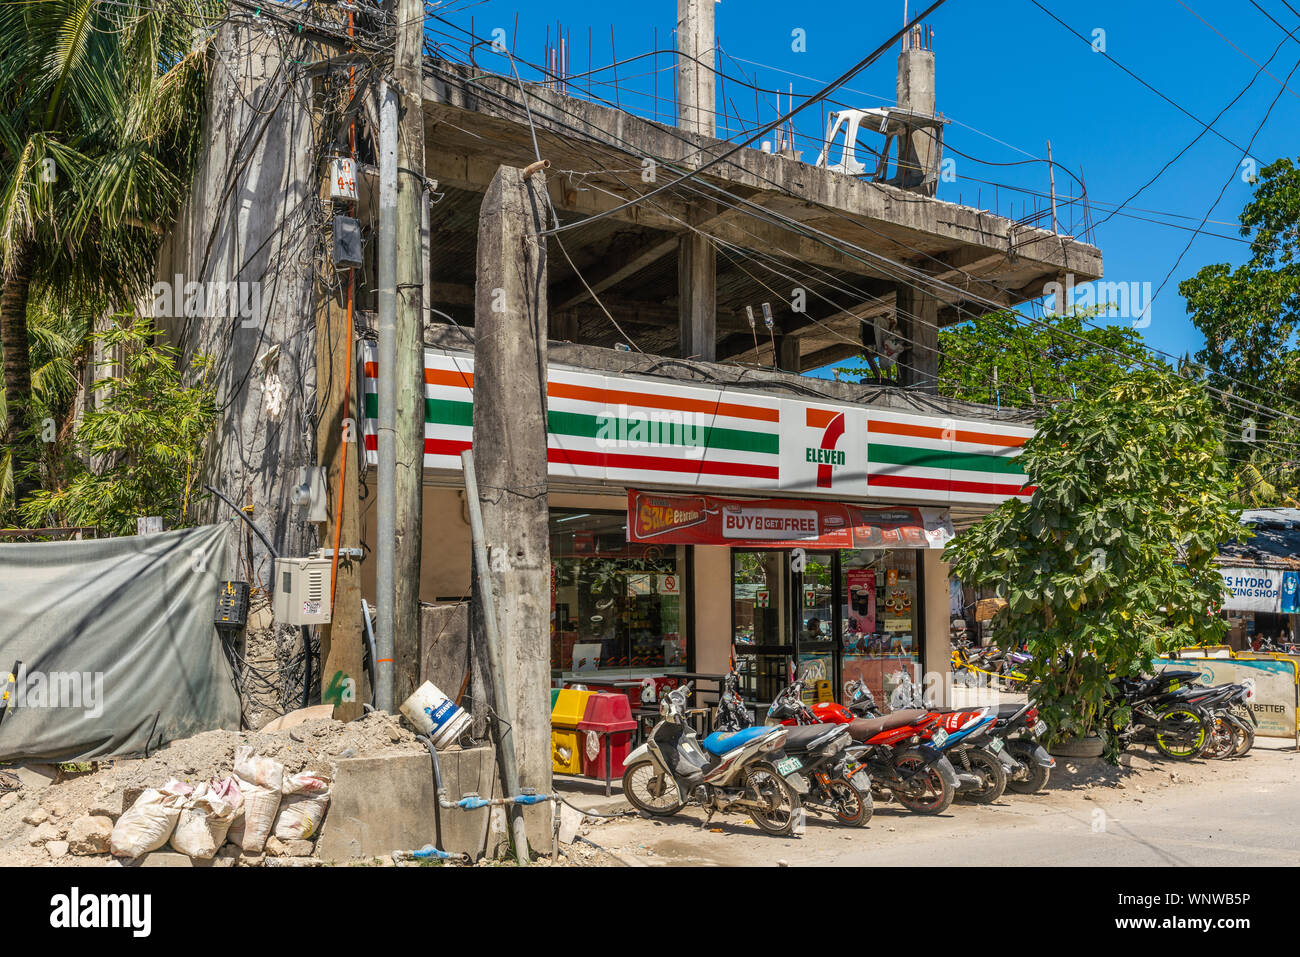 Manoc-Manoc, Boracay Island, Philippines - March 4, 2019: Near Cagban Jetty Port and ferry pier. Seven-Eleven store with line of motorbikes in front. Stock Photo